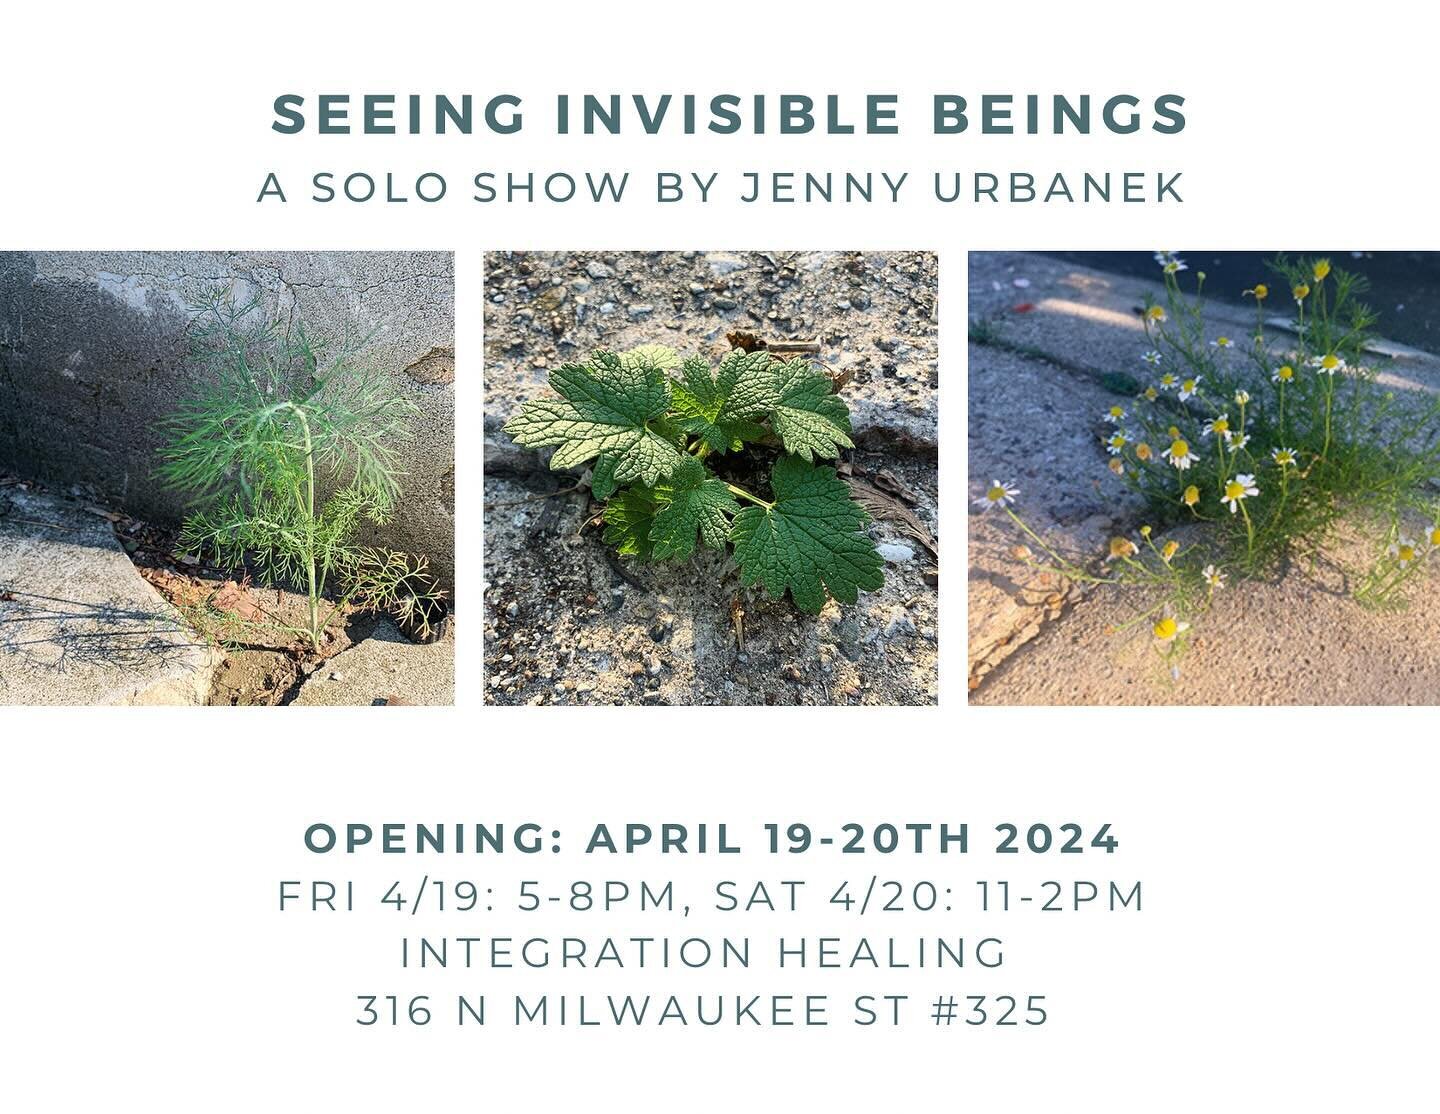 Super jazzed for my first solo show ever! Save the date and come to my art show for @gallerynightmke! 
.
.
.
#mkeartist #plants #seeingtheunseen #photography #plantsincracks